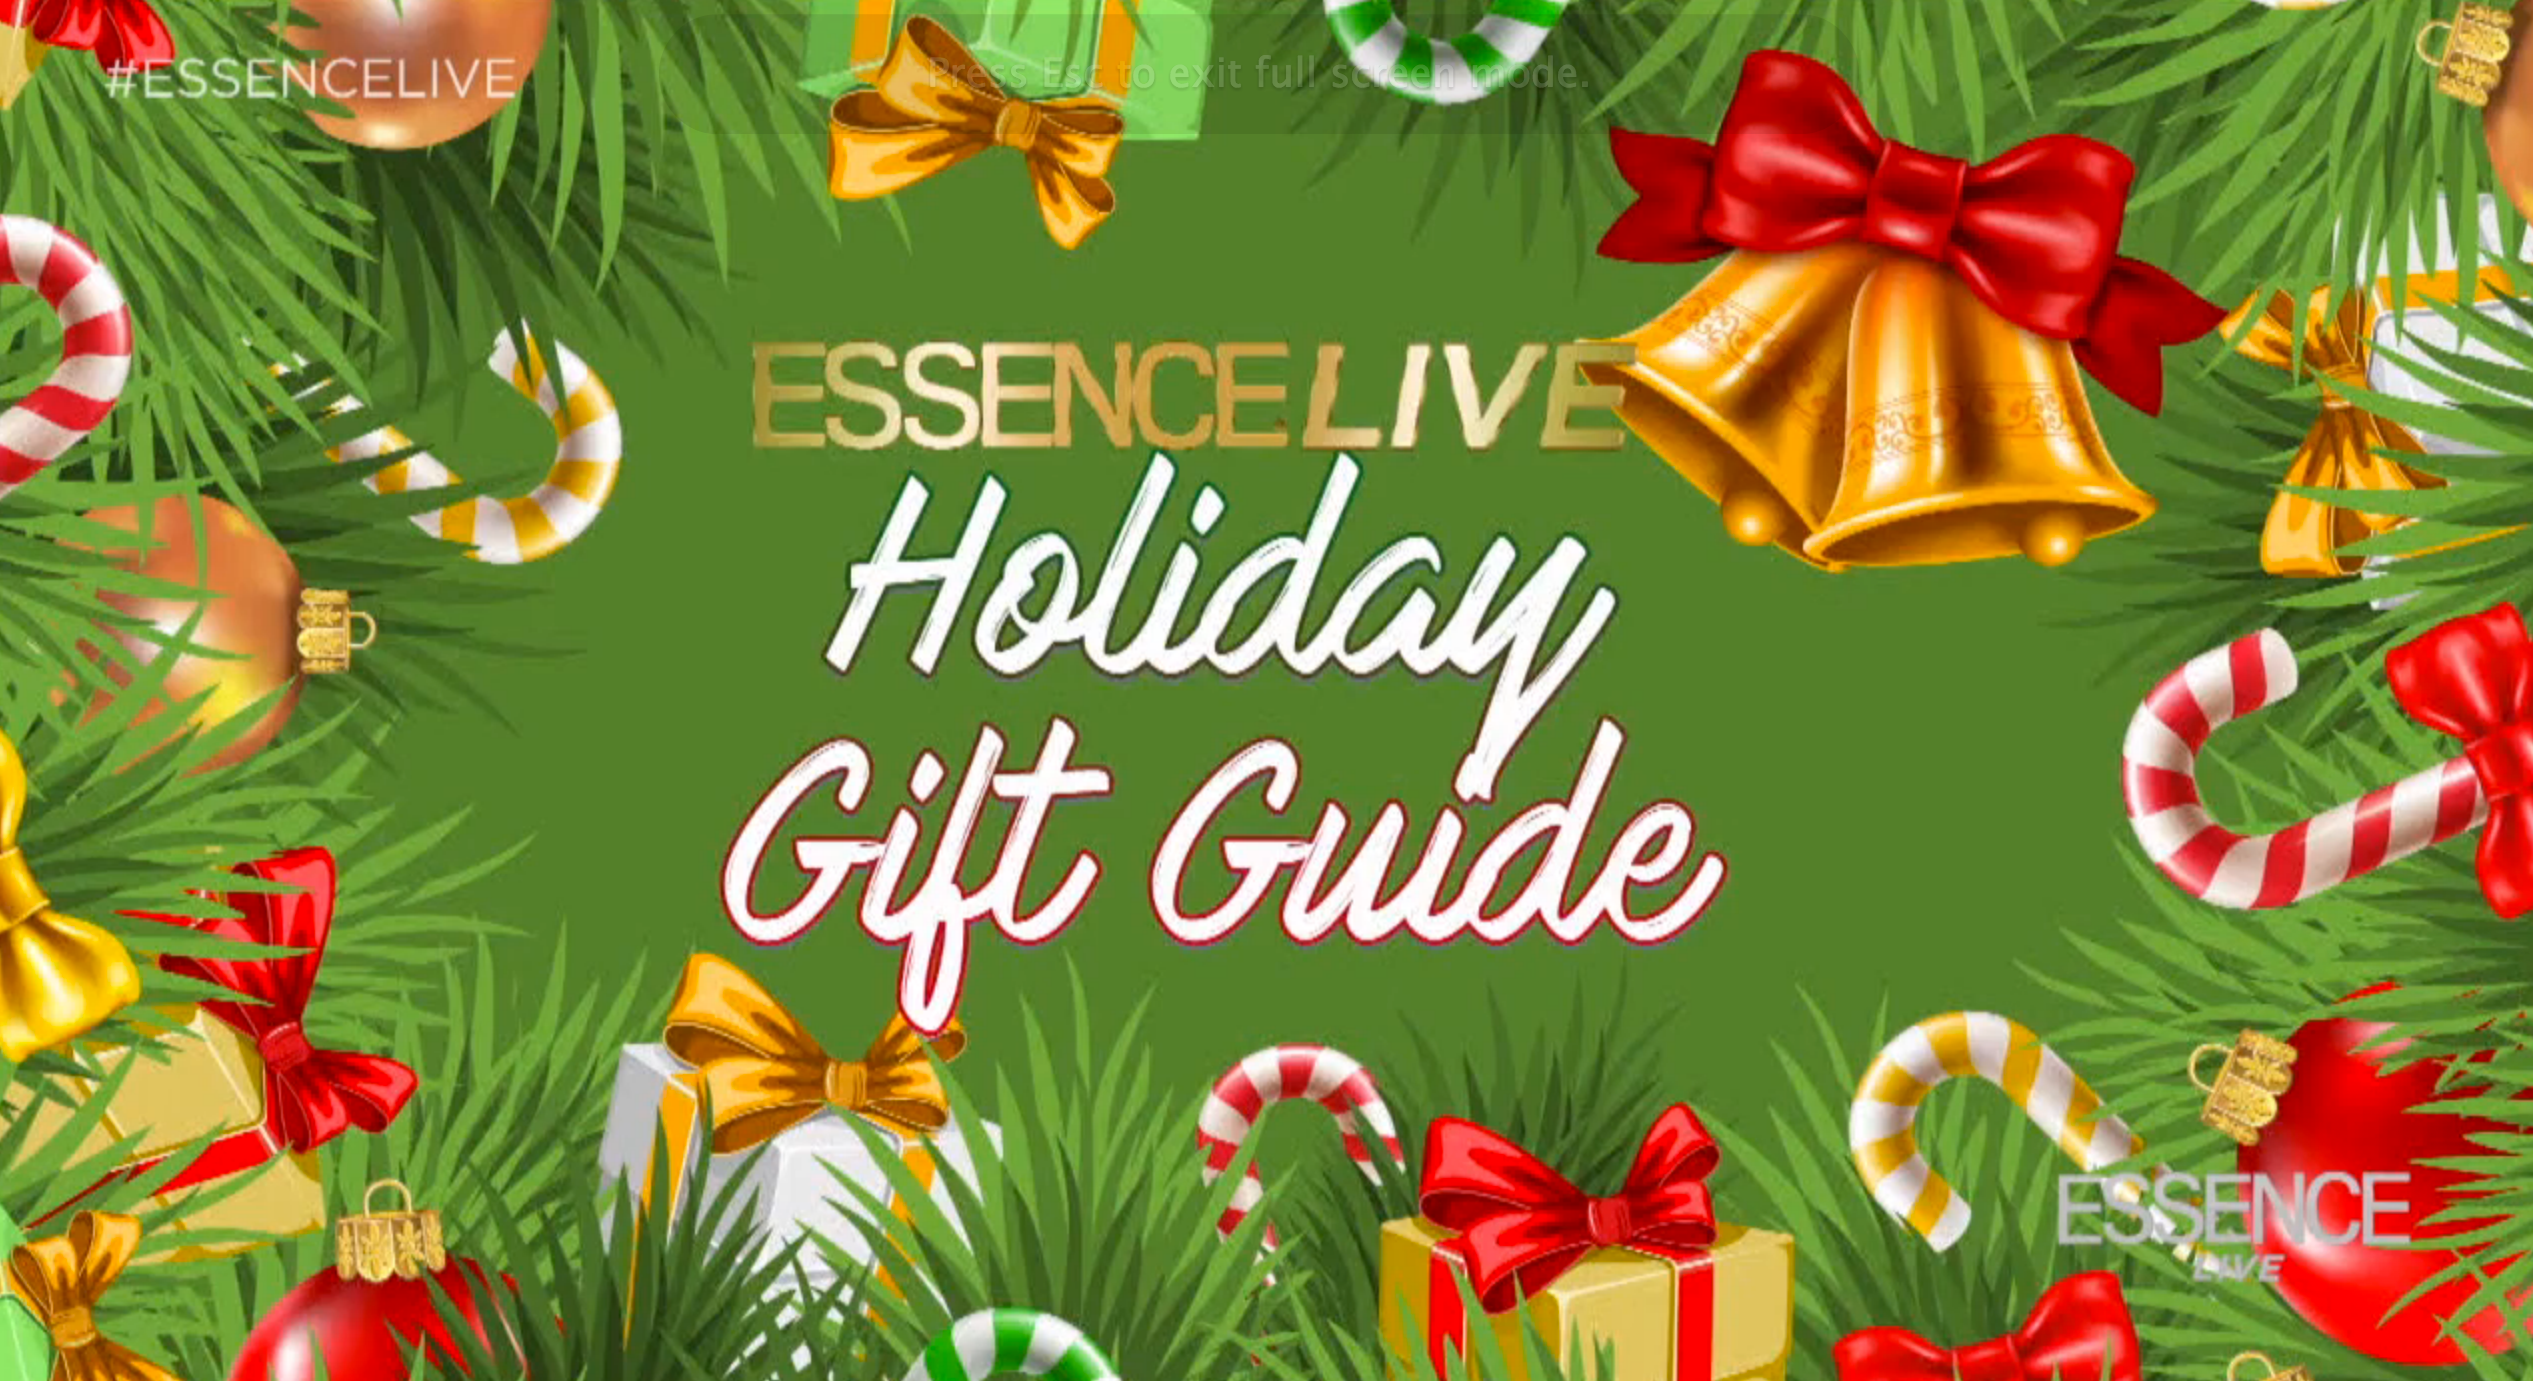 Find The Perfect Gift With Our #BuyBlack Gift Guide
